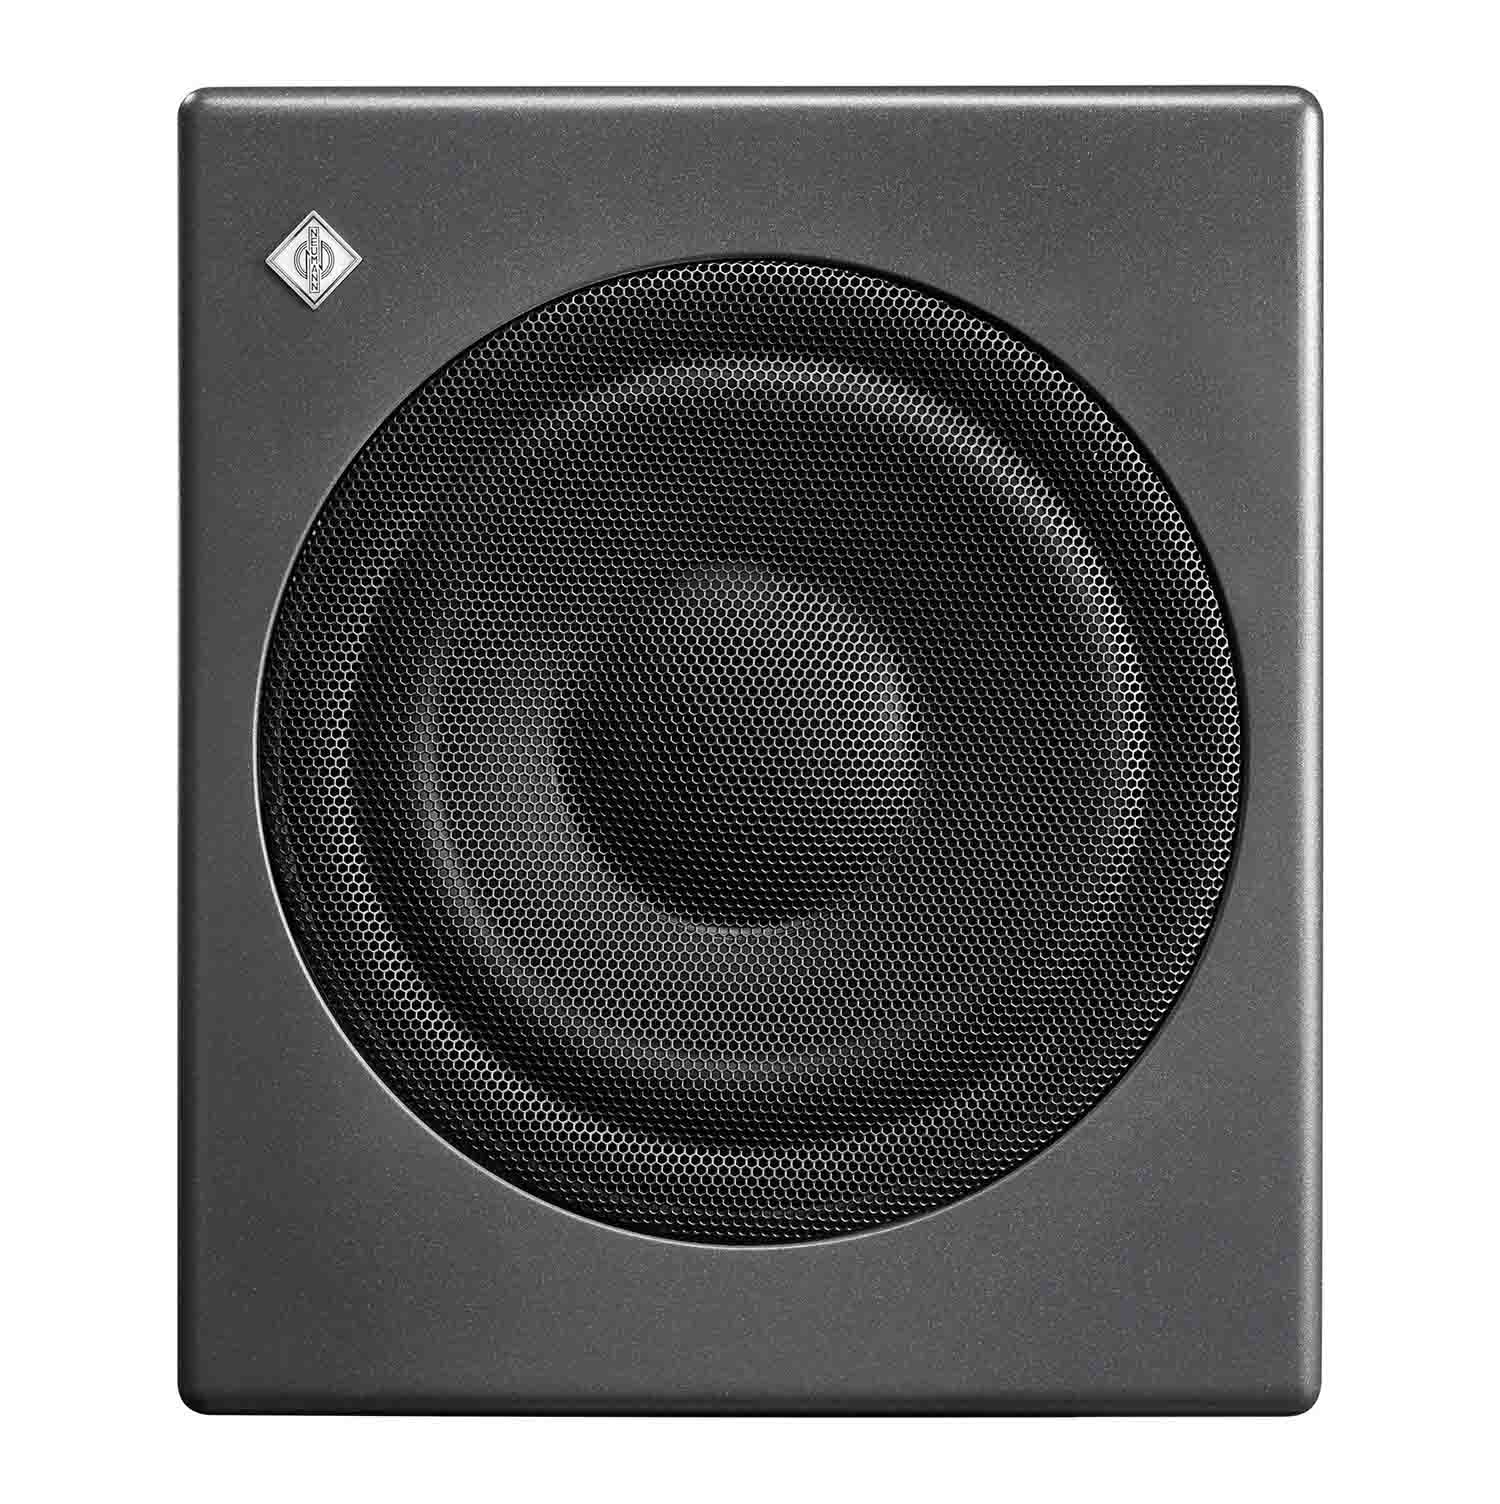 Neumann KH 750 Compact DSP-Controlled Closed-Cabinet Subwoofer - Hollywood DJ